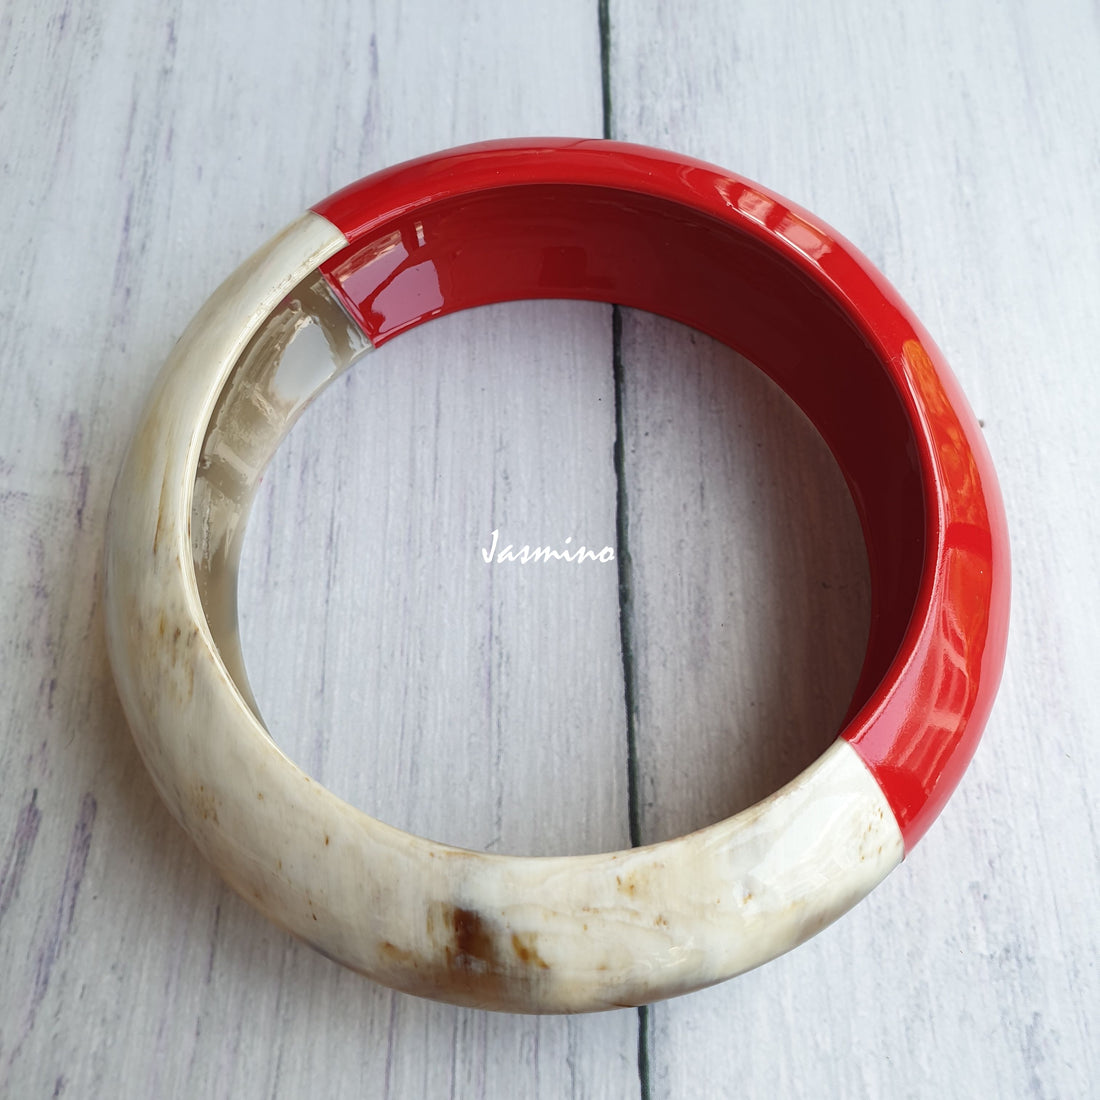 Jasmino unique handmade bangle bracelet is detailed by a red half and a white half in natural buffalo horn for Christmas gifts